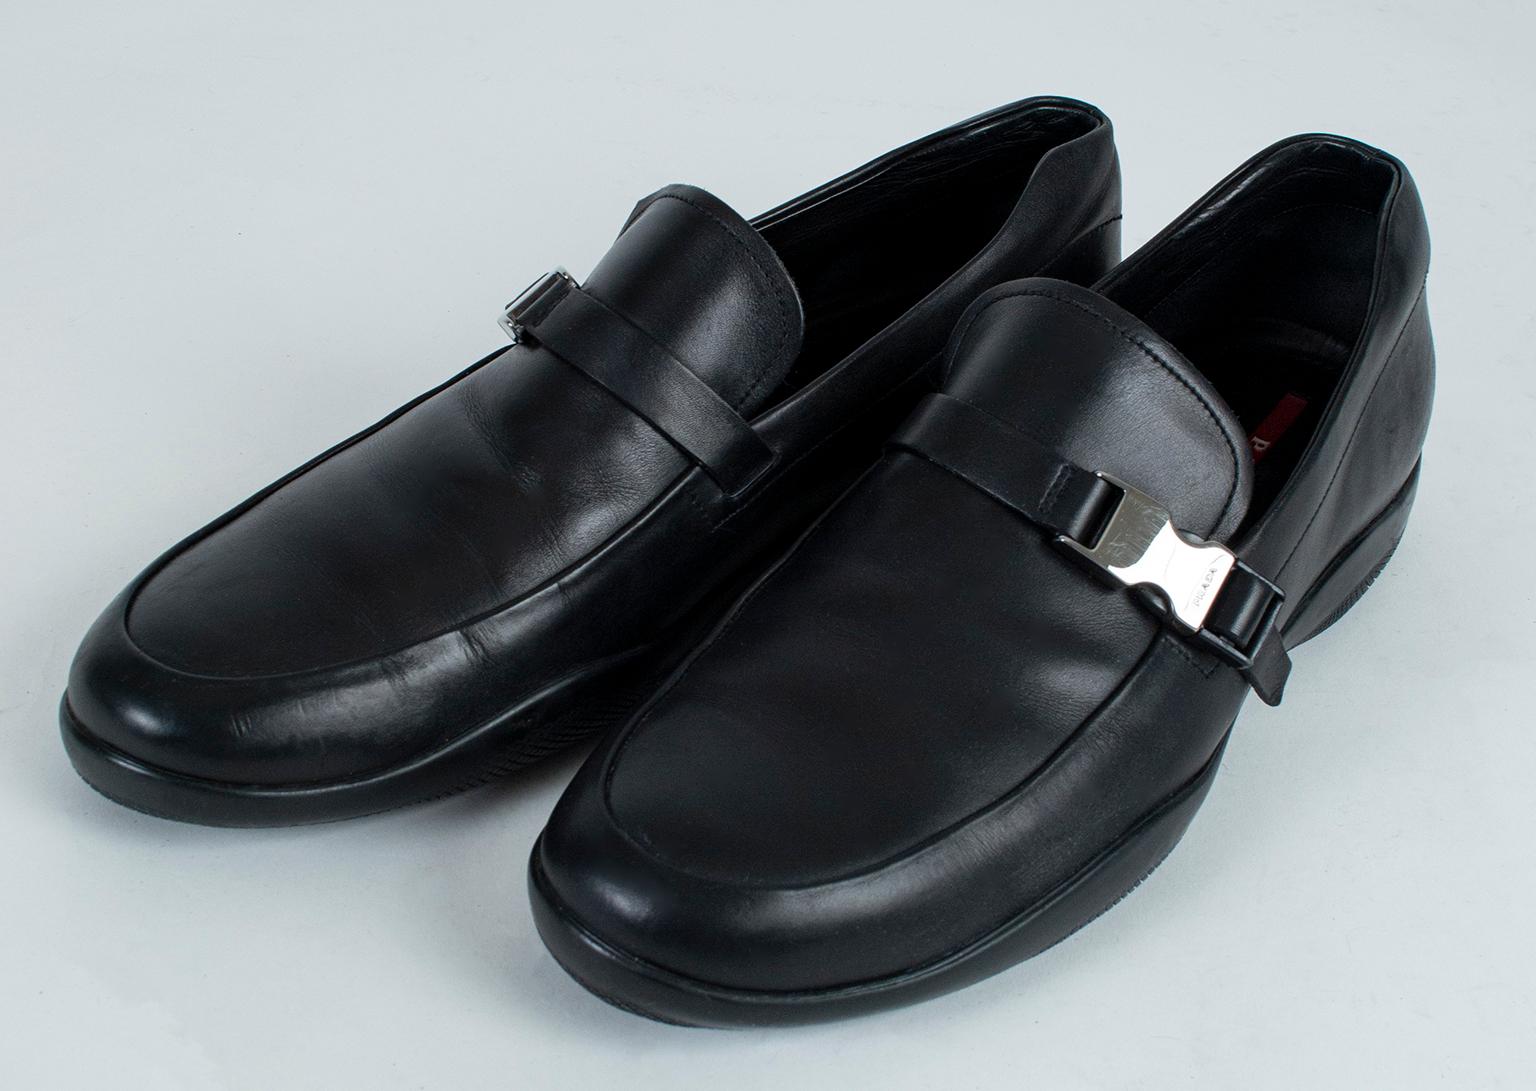 As soft and comfortable as a pair of sneakers (but infinitely more elegant), these rubber soled loafers combine the cushion of running shoes with the polish of dress shoes. The polished silver buckle at the outside vamp offers just the right amount